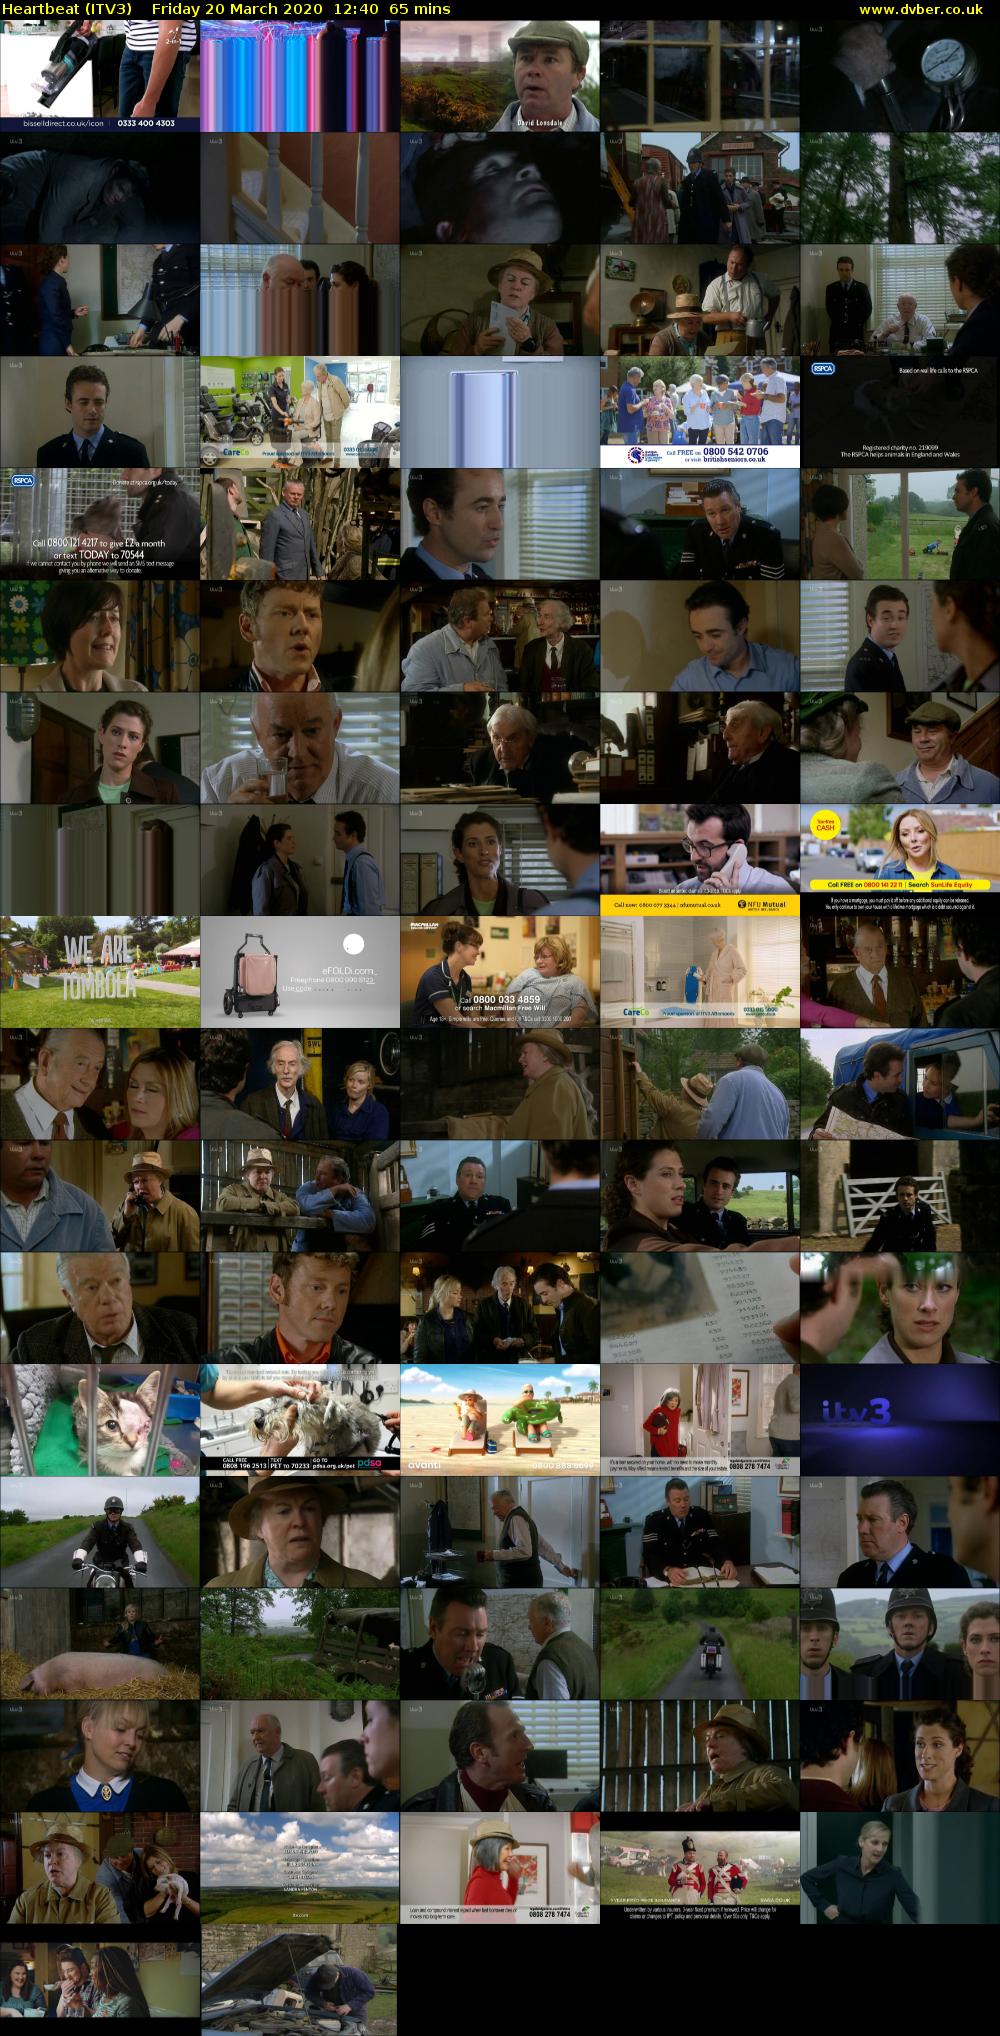 Heartbeat (ITV3) Friday 20 March 2020 12:40 - 13:45